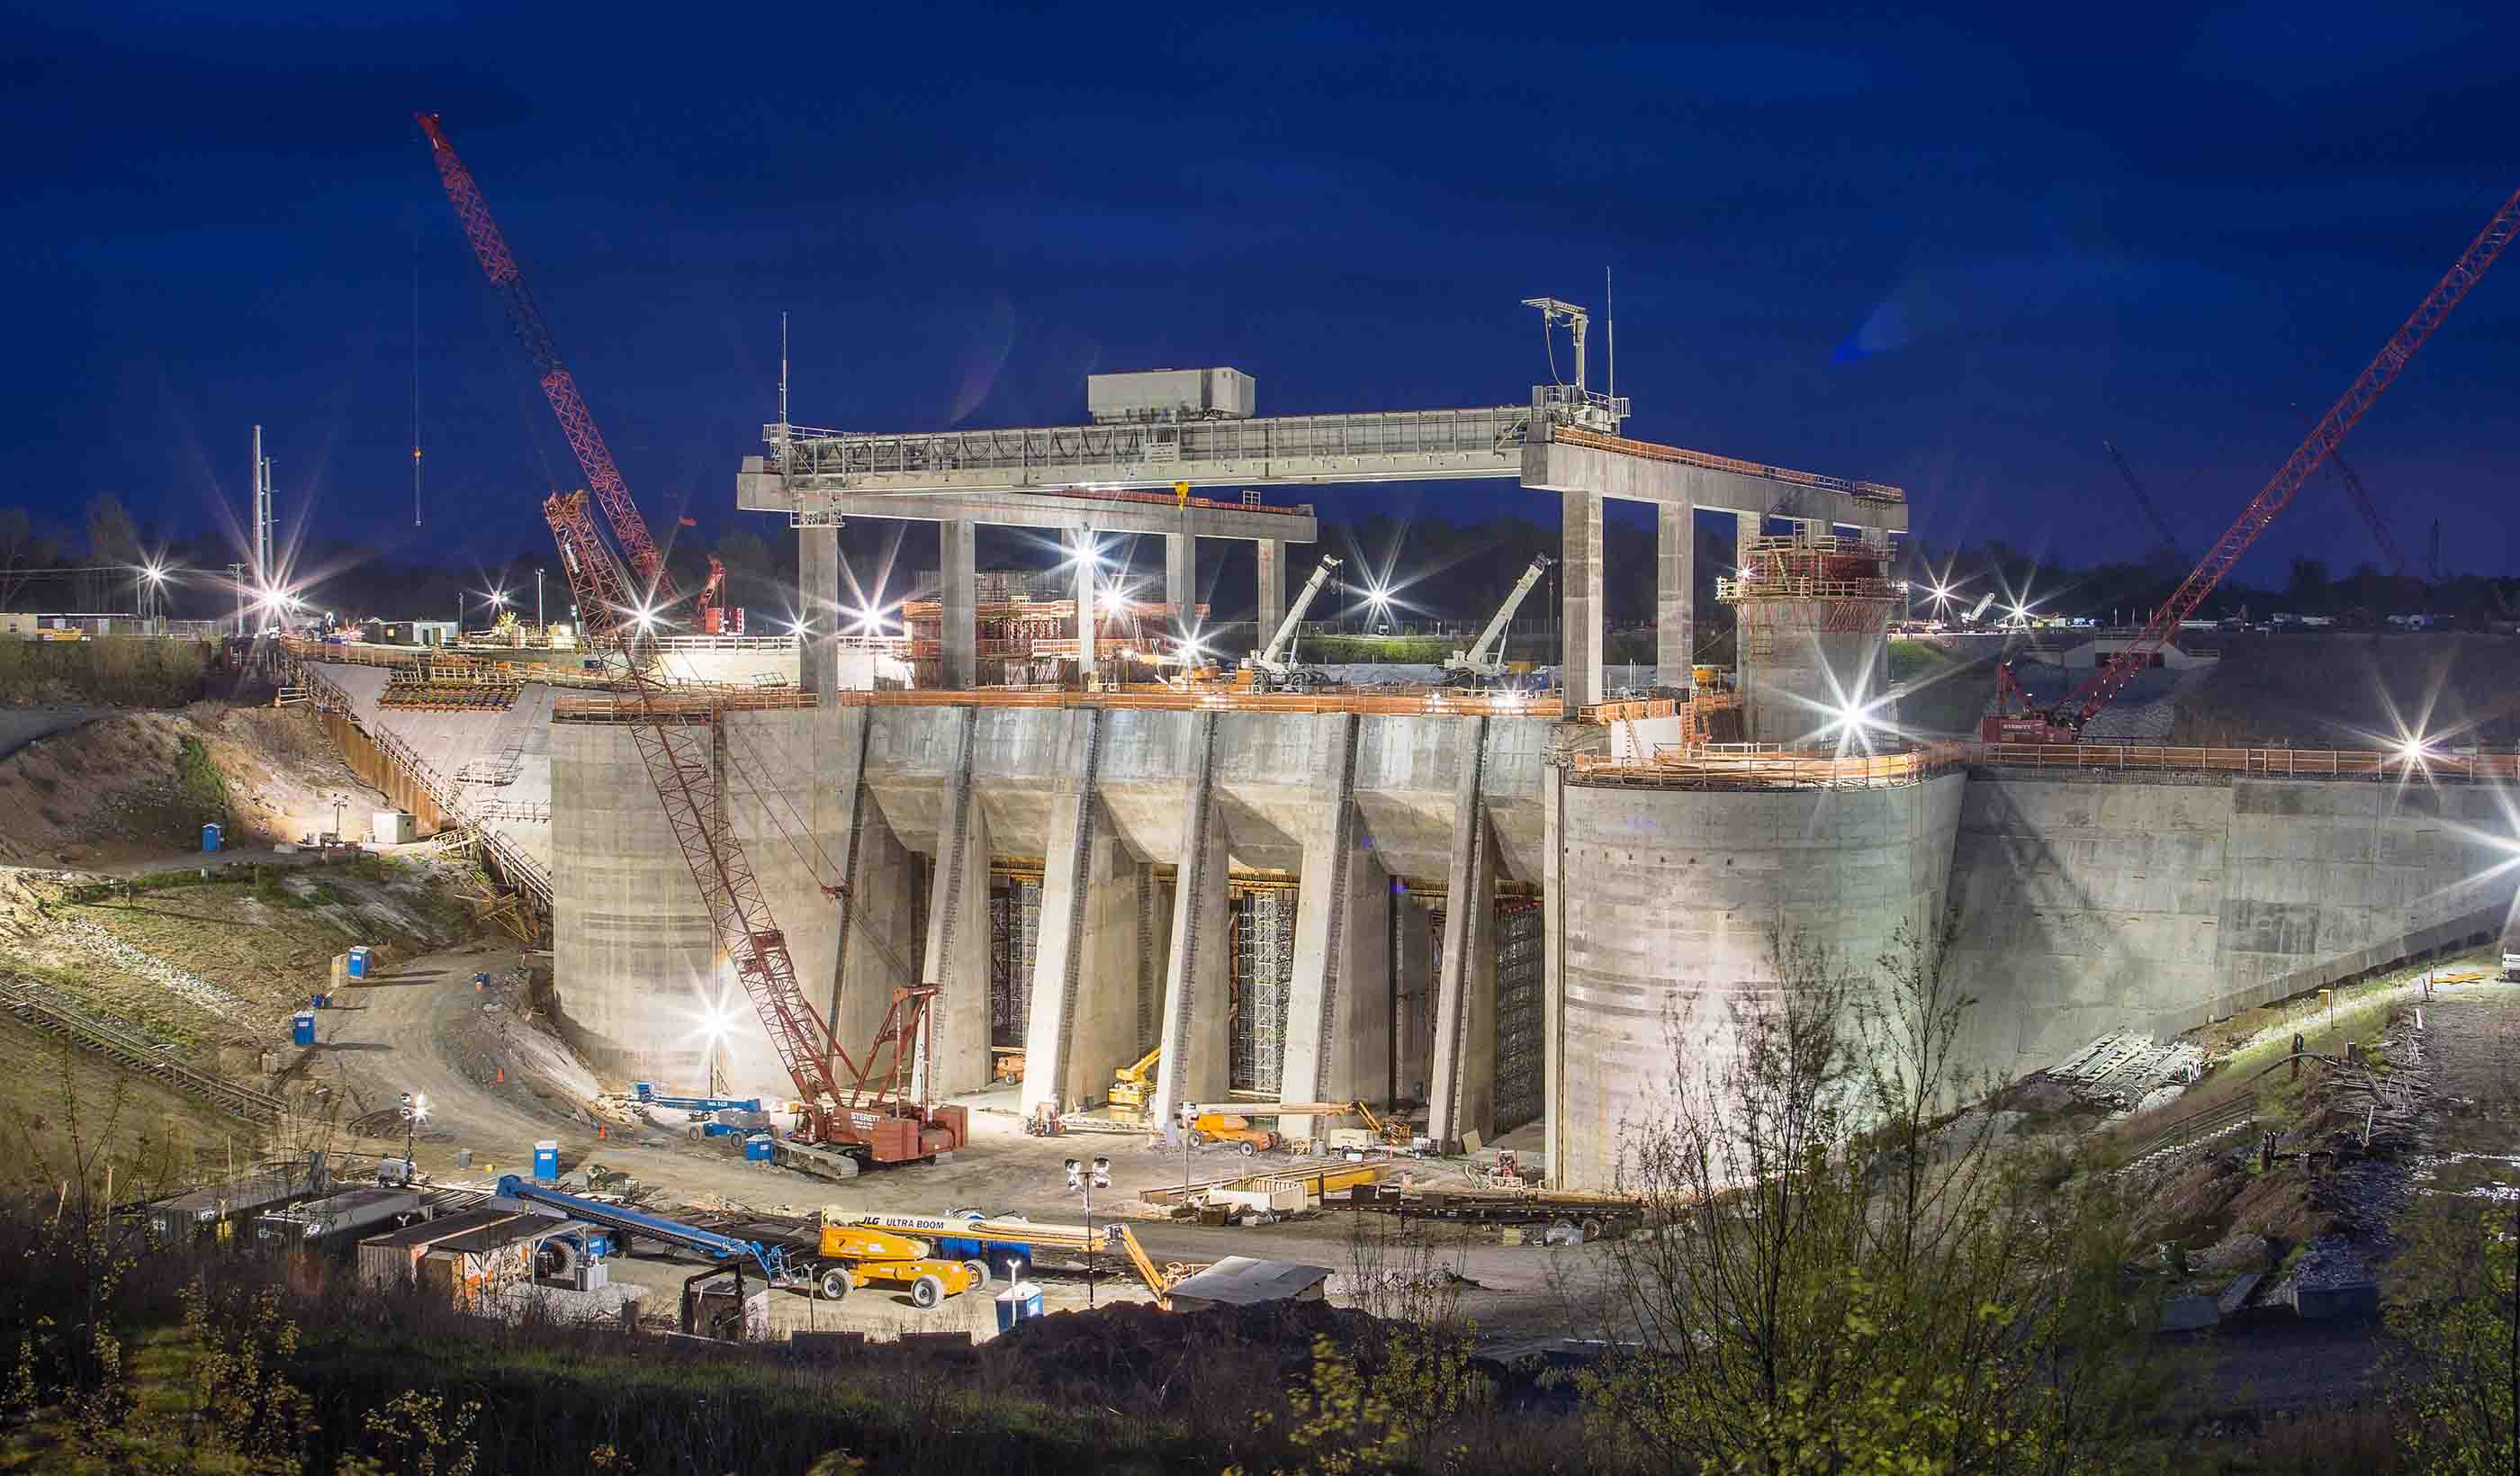 The future of American hydropower